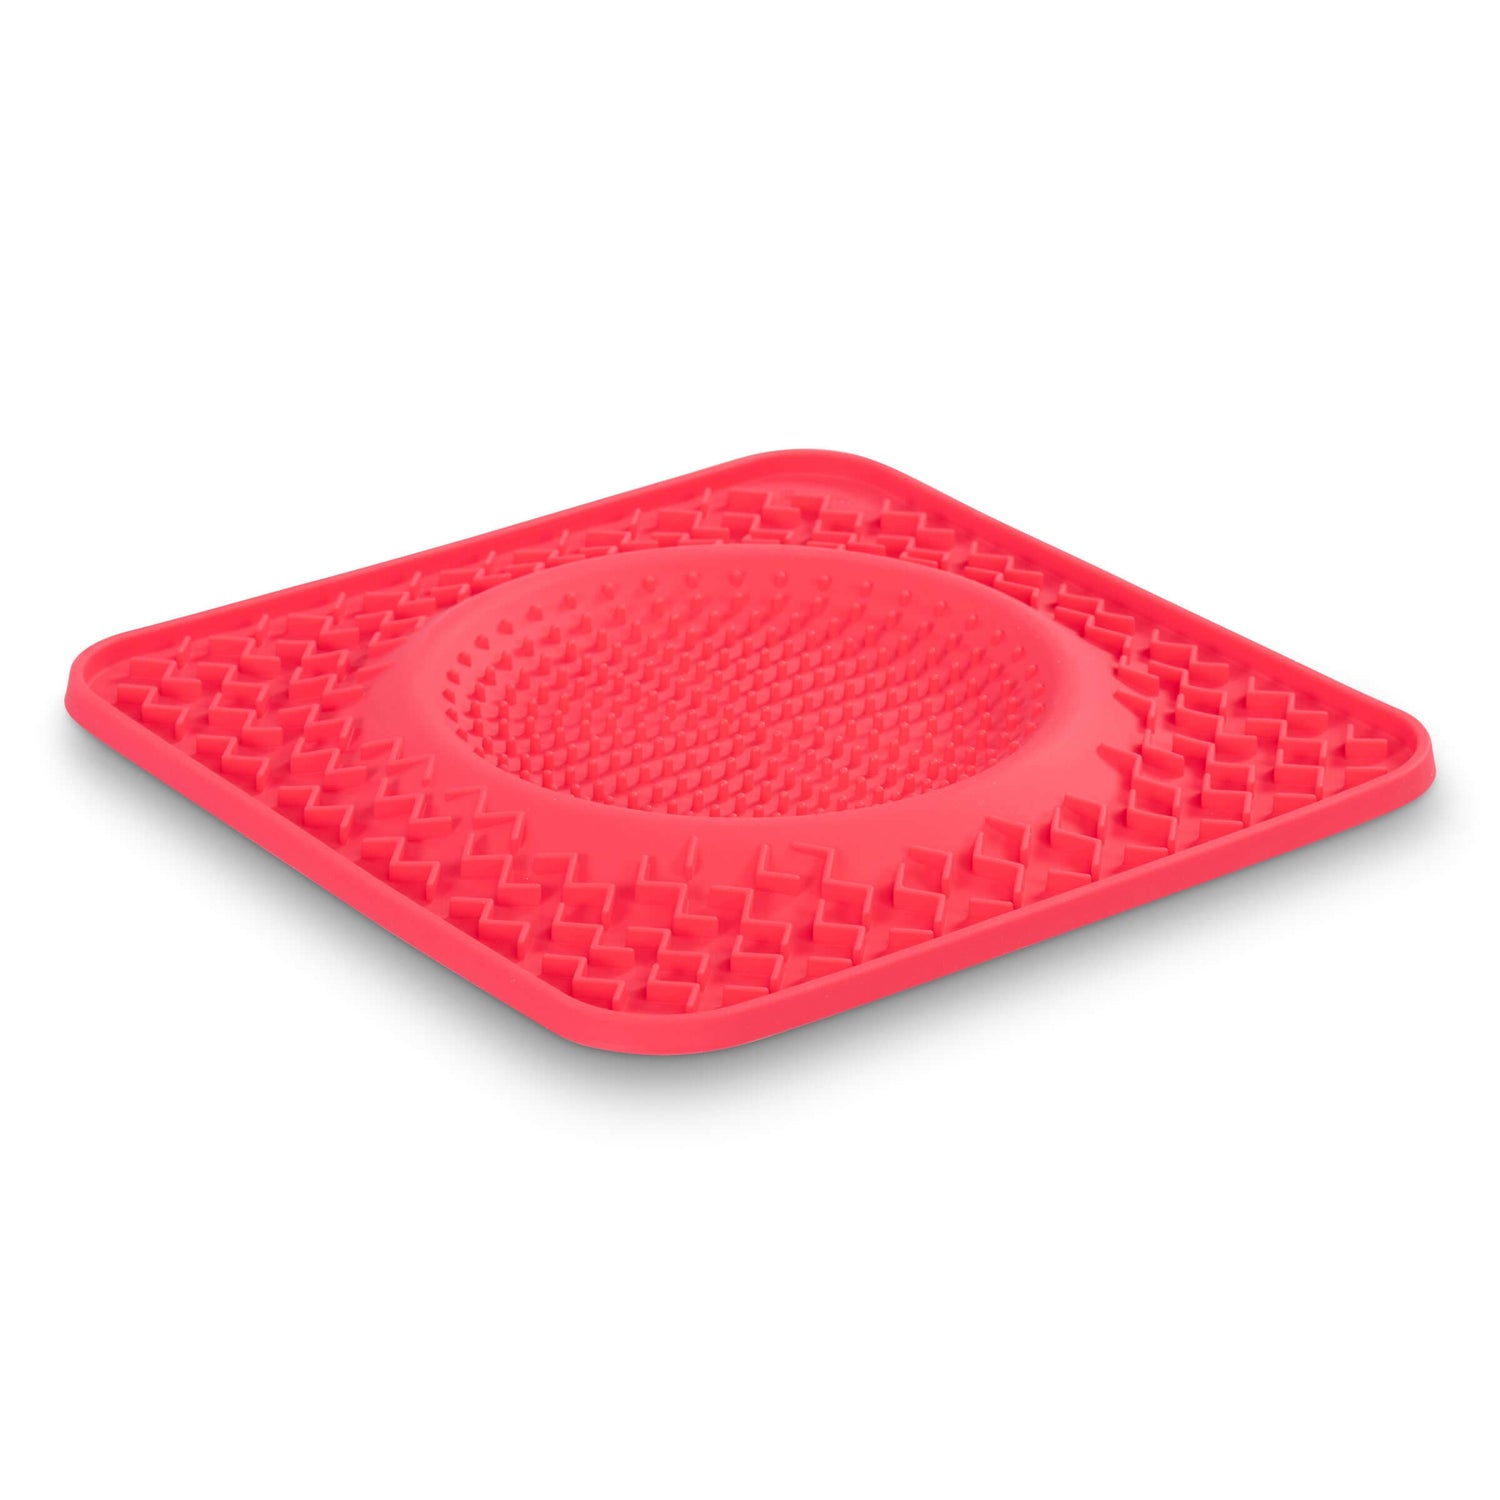 Our red (watermelon) 10 inch by 10 inch lick bowl mat can be frozen with treats for prolonged licking action!  Liquids in the center and spreads around the edges. 